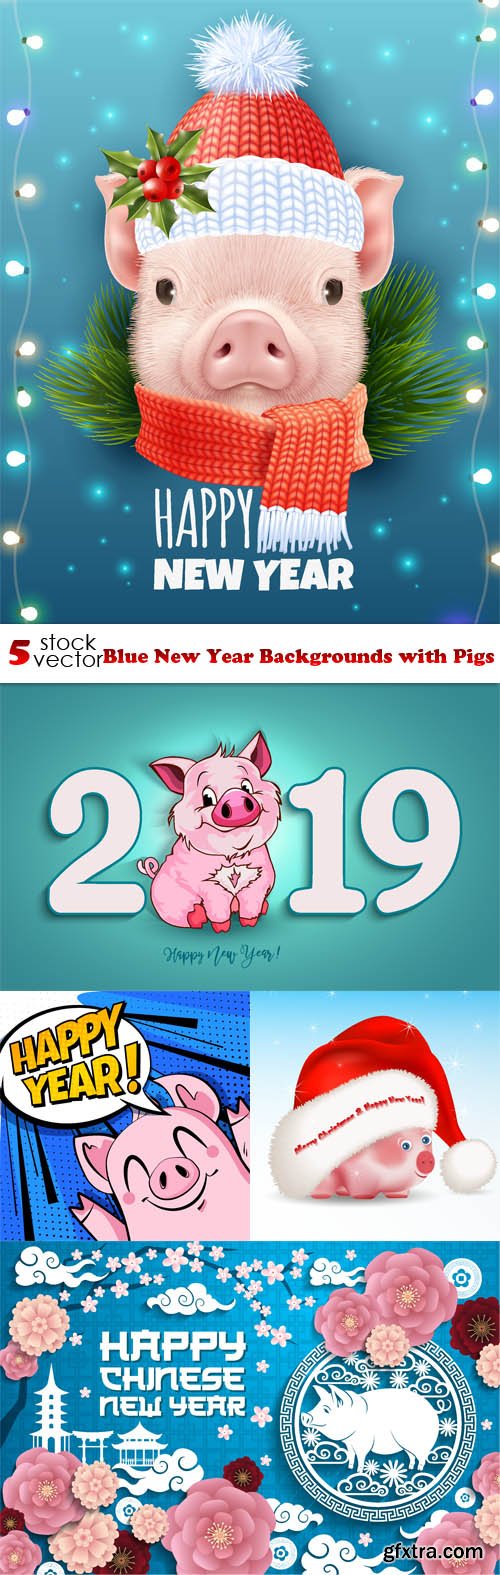 Vectors - Blue New Year Backgrounds with Pigs